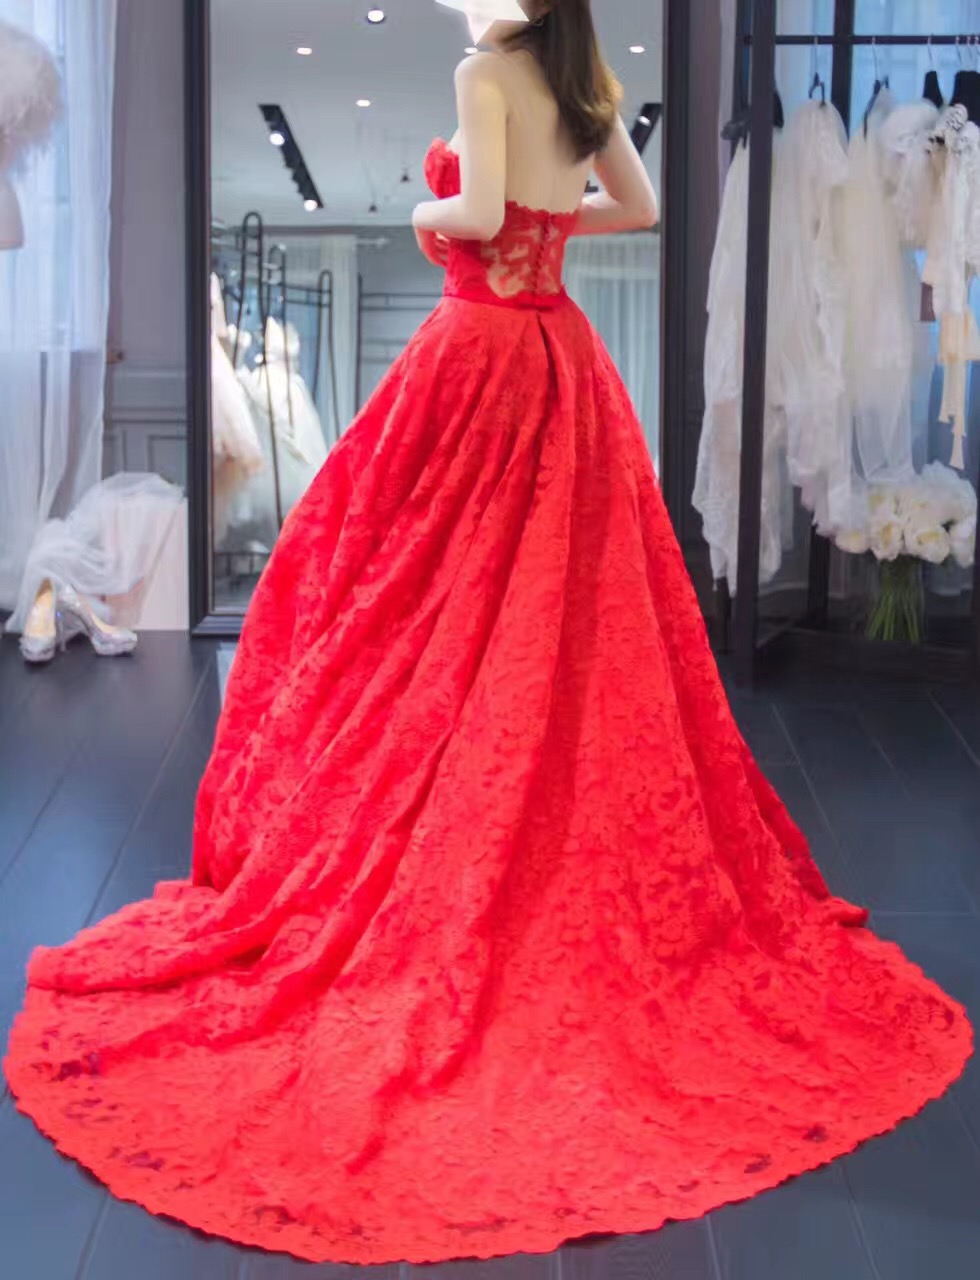 Lace Evening Dress 2017,real Made Red Lace Evening Gown,prom Dress Lace;elegant Long Sweetheart Wedding Party Gown